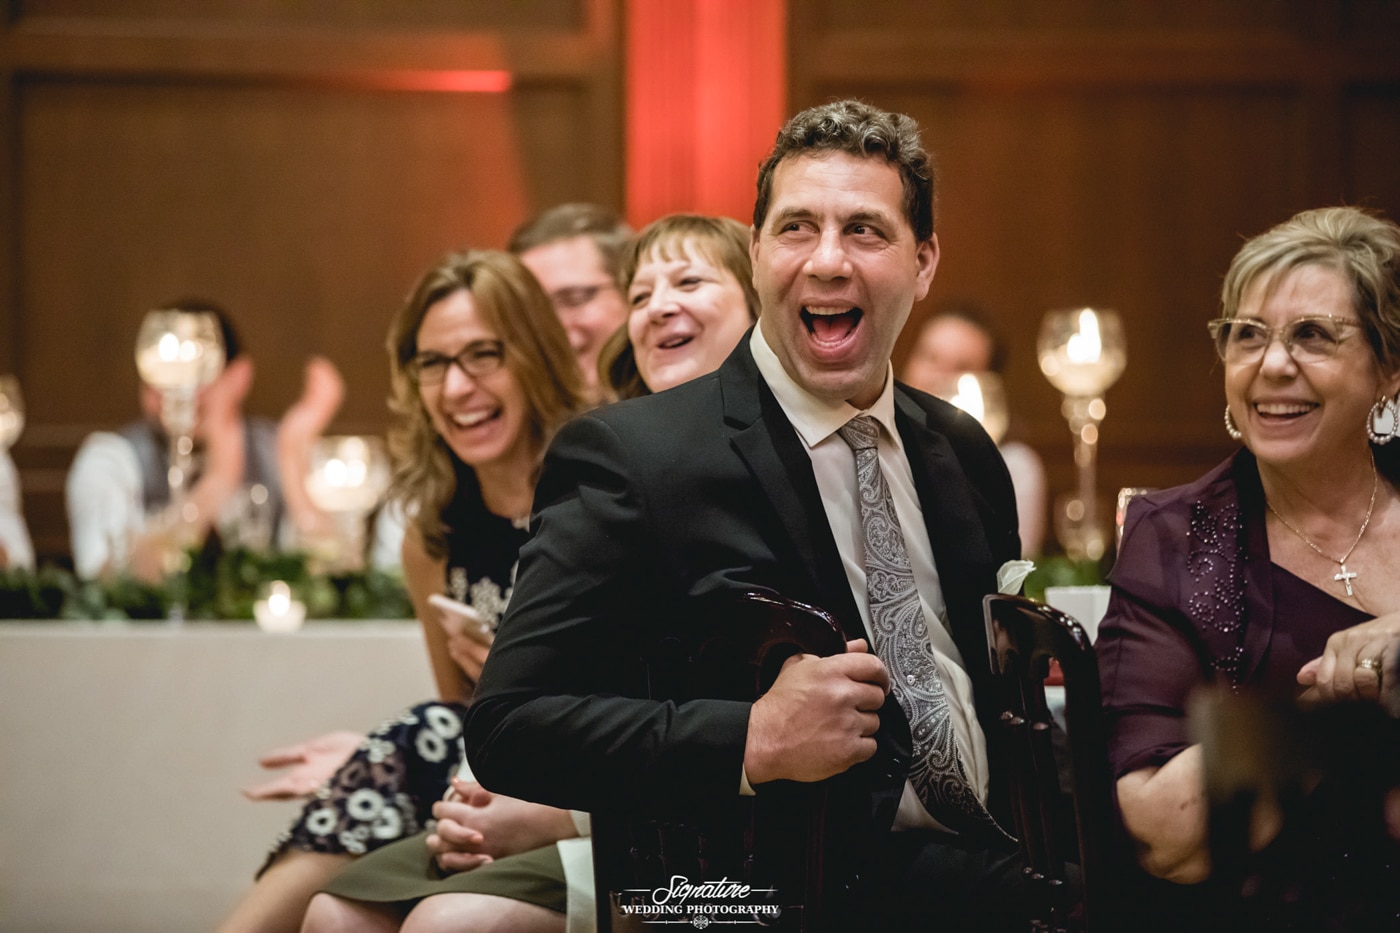 Wedding guests laughing candid